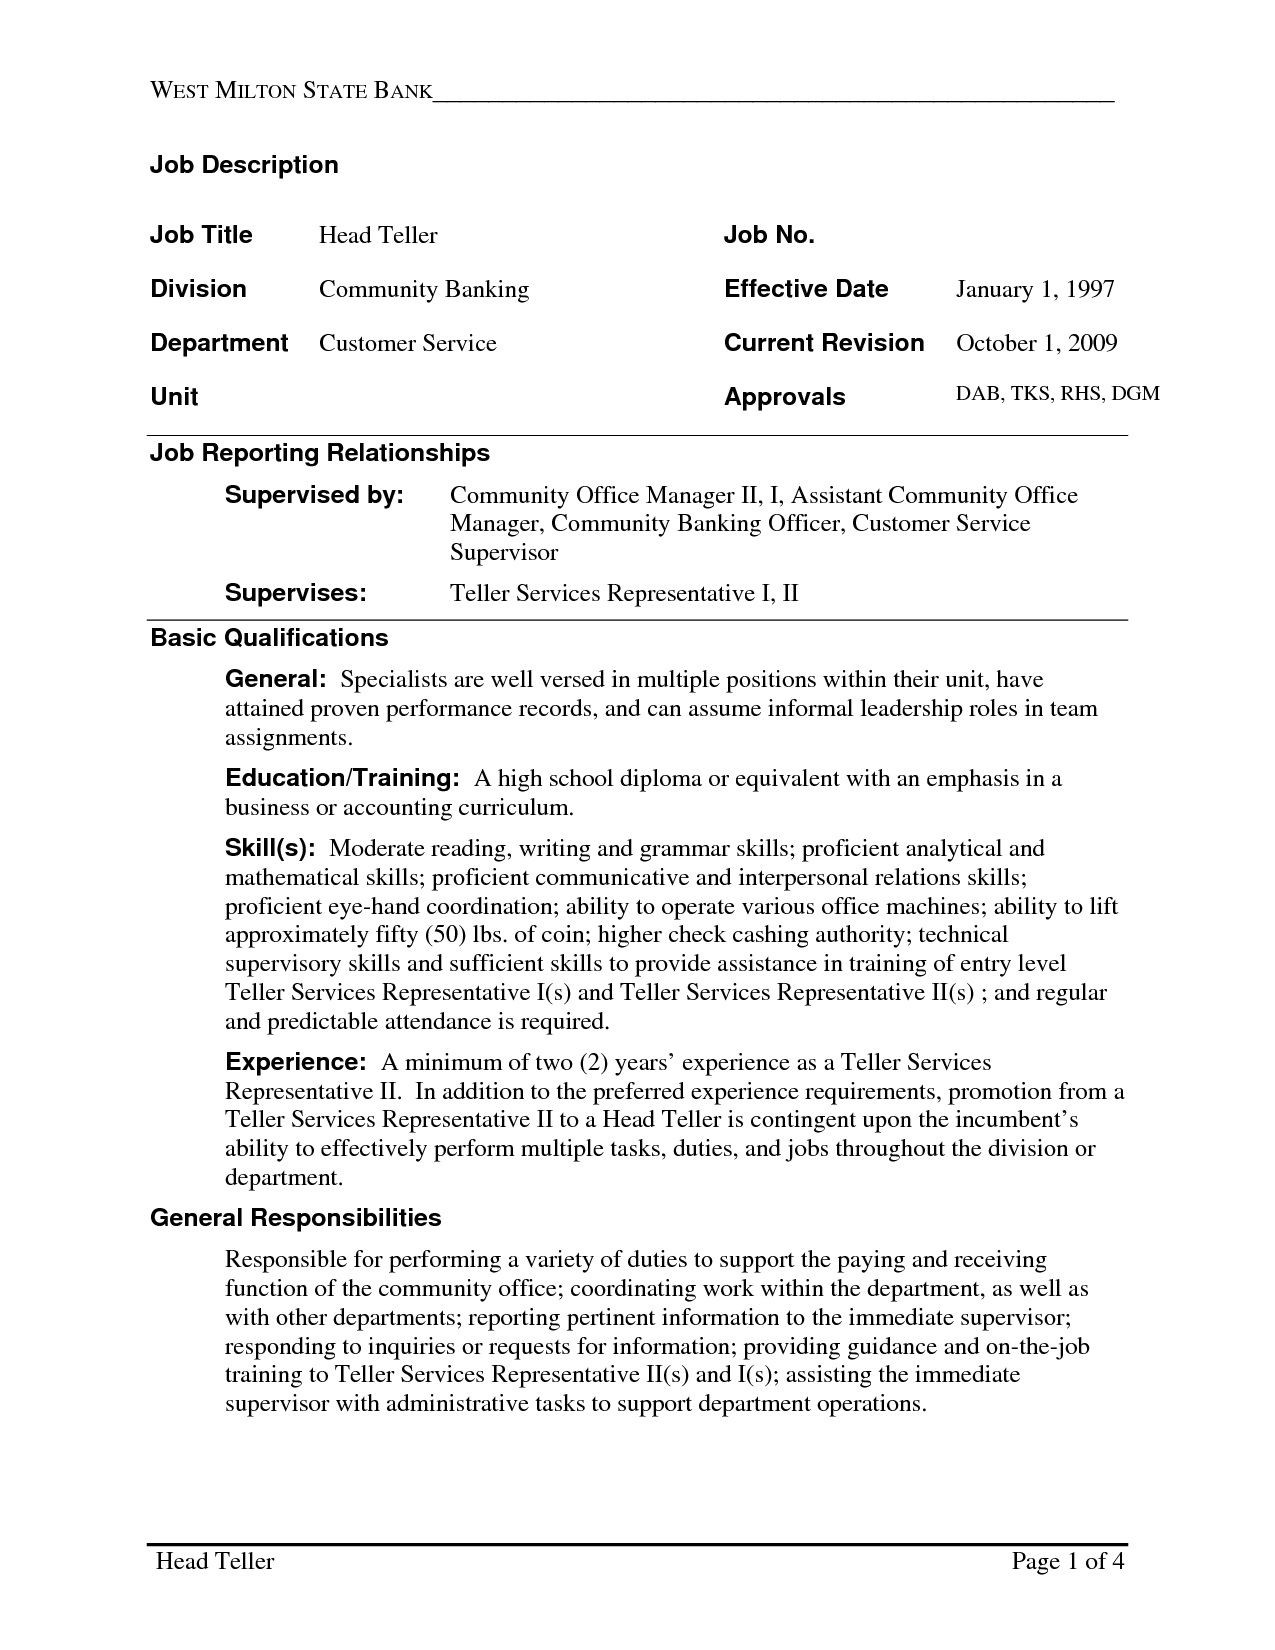 Sample Resume for Bank Jobs with No Experience Bank Teller Resume with No Experience Latest Resume format